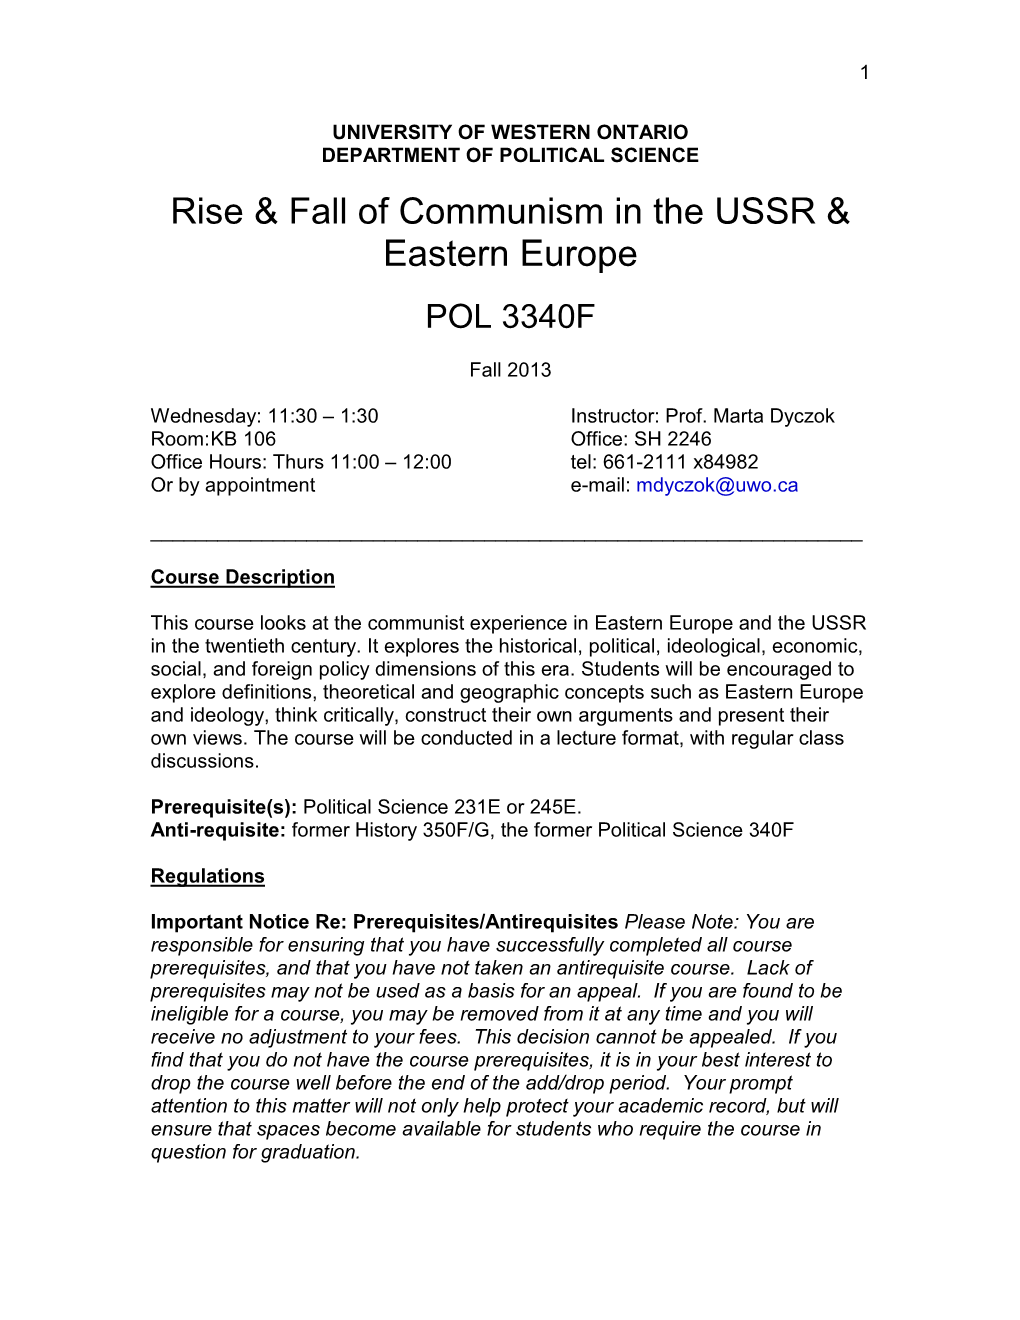 Rise & Fall of Communism in the USSR & Eastern Europe